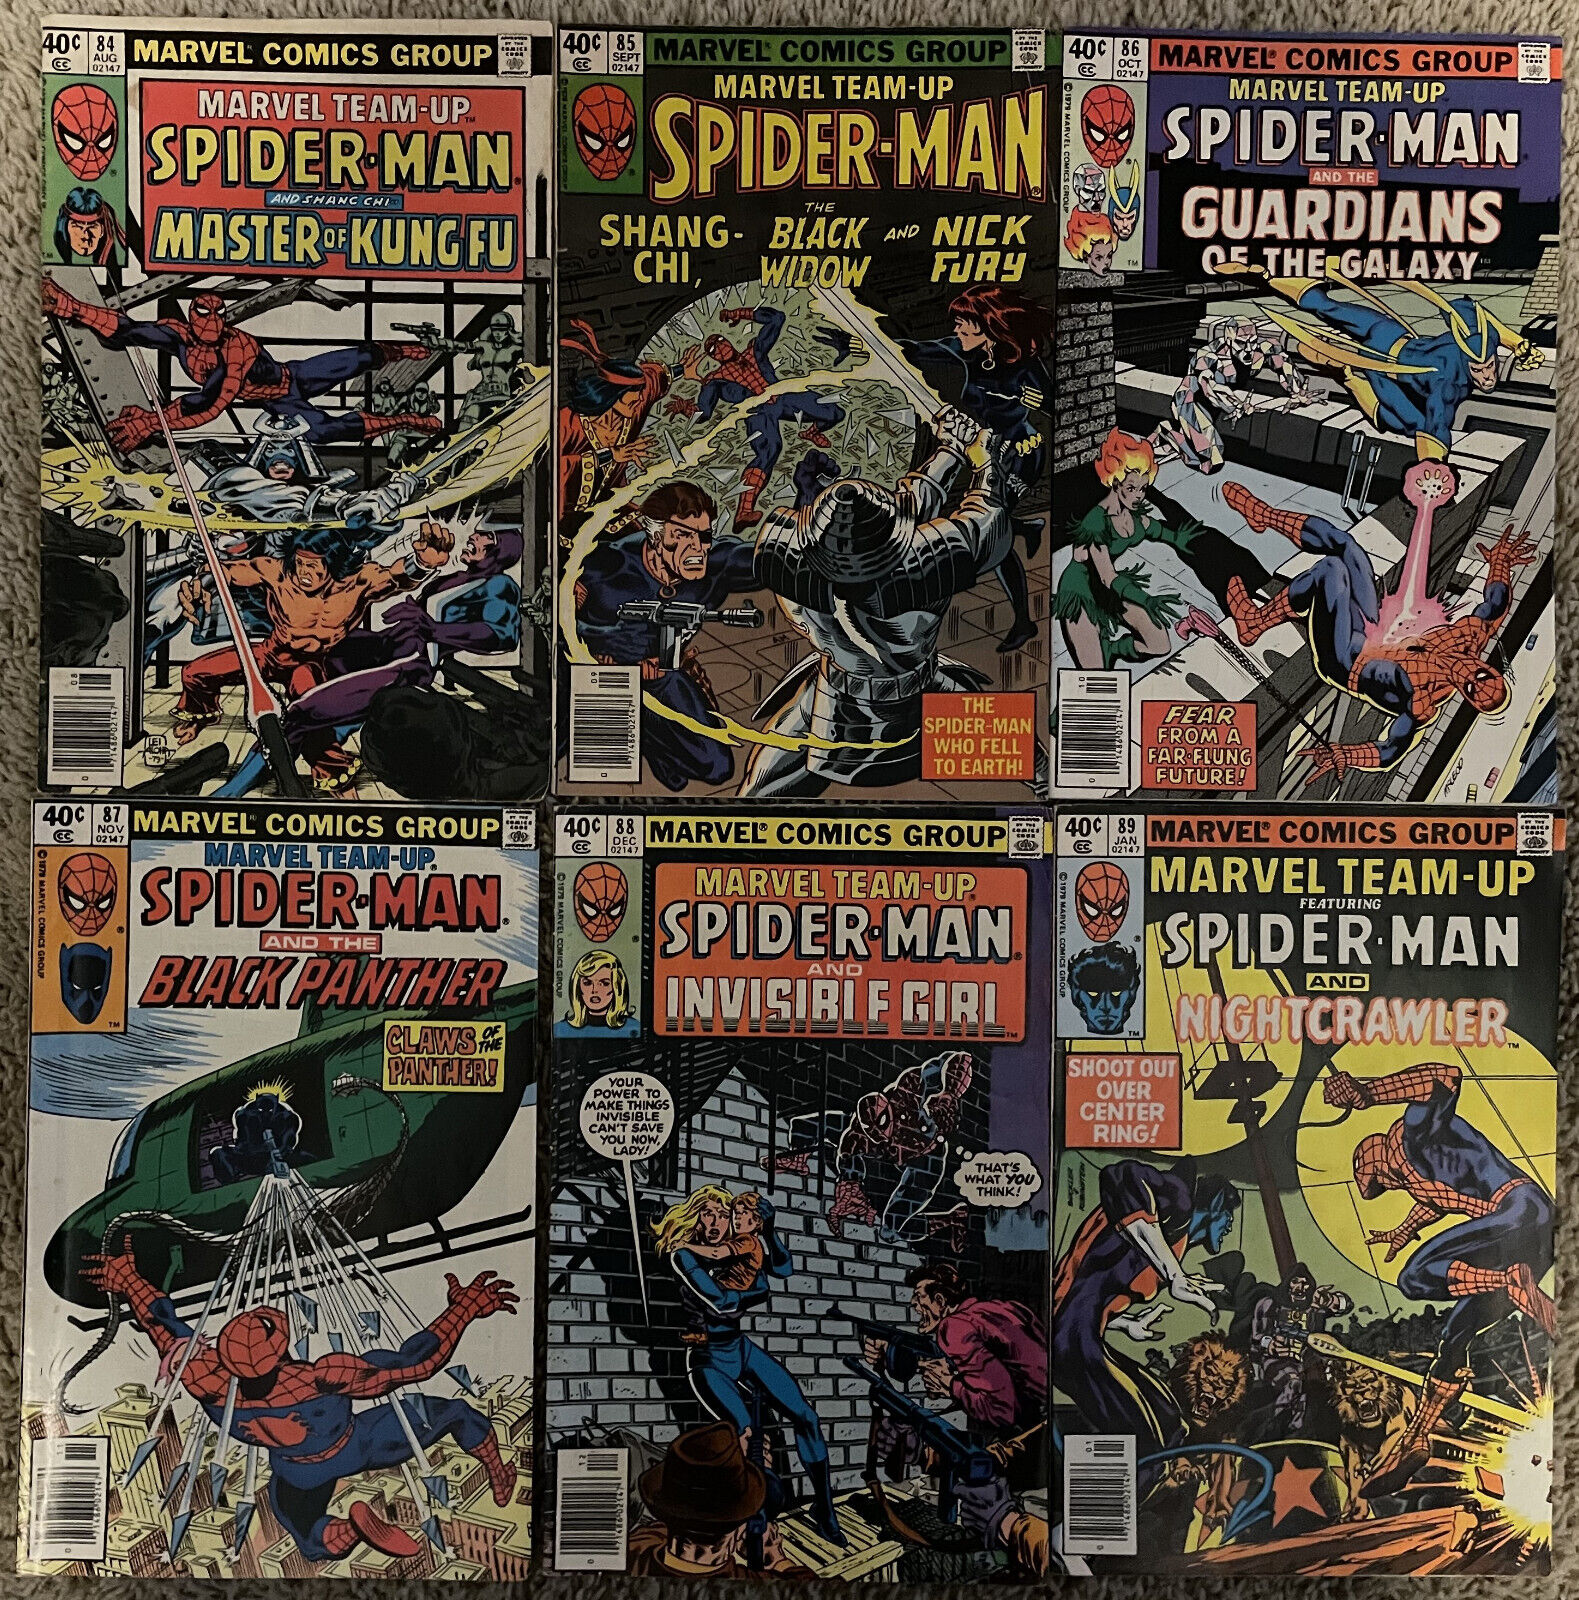 Marvel Team-Up Spider-man Lot #6 Marvel comic  series from the 1970s